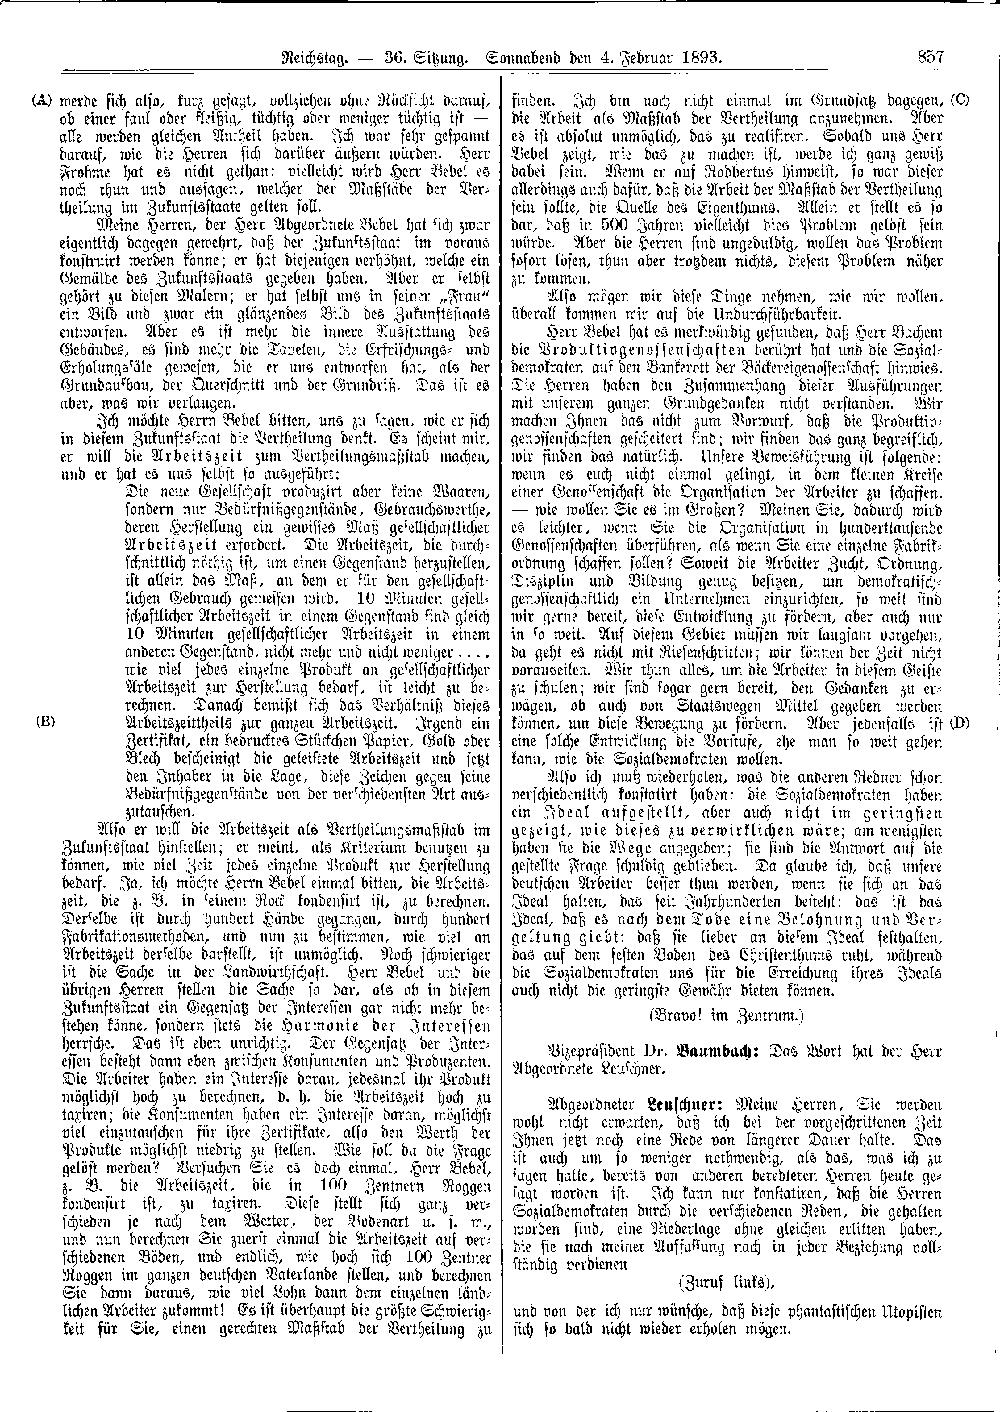 Scan of page 857